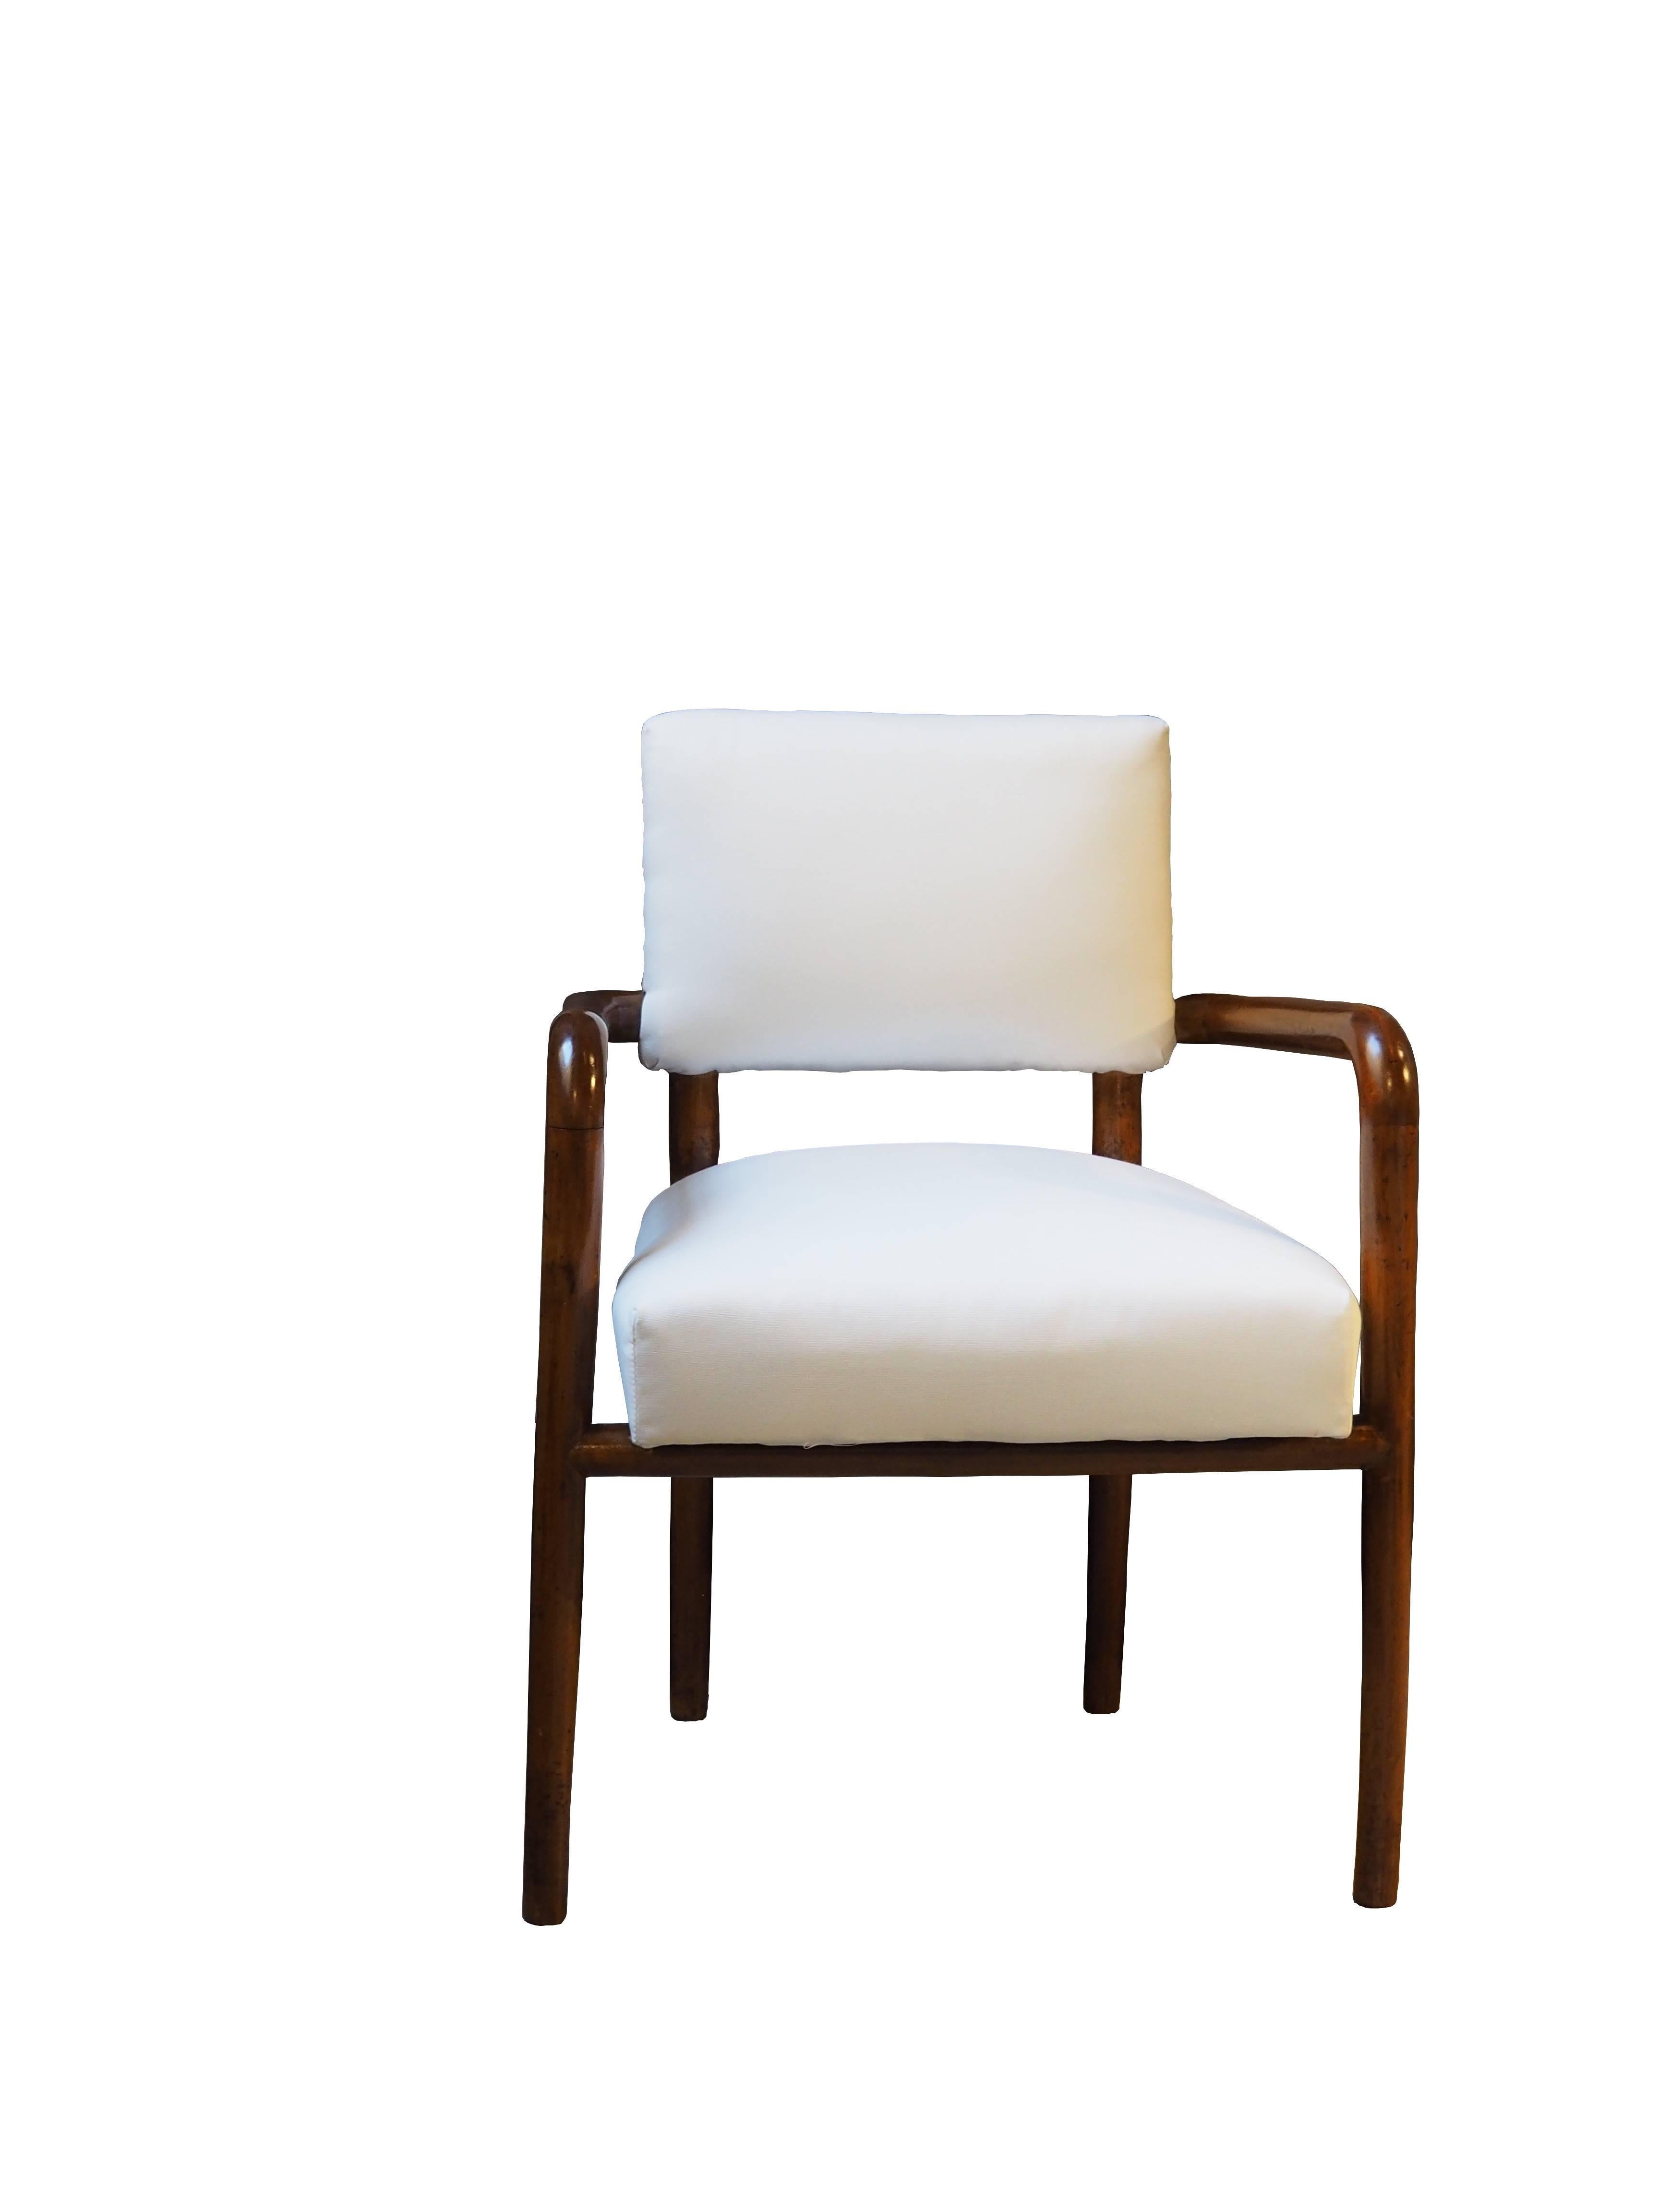 Set of four chairs and four armchairs designed by Gino Levi Montalcini, one of the most important representatives of the rationalist movement in Italy. These chairs has been realized in 1938 for Casa Pastore in Turin and made of pear wood and